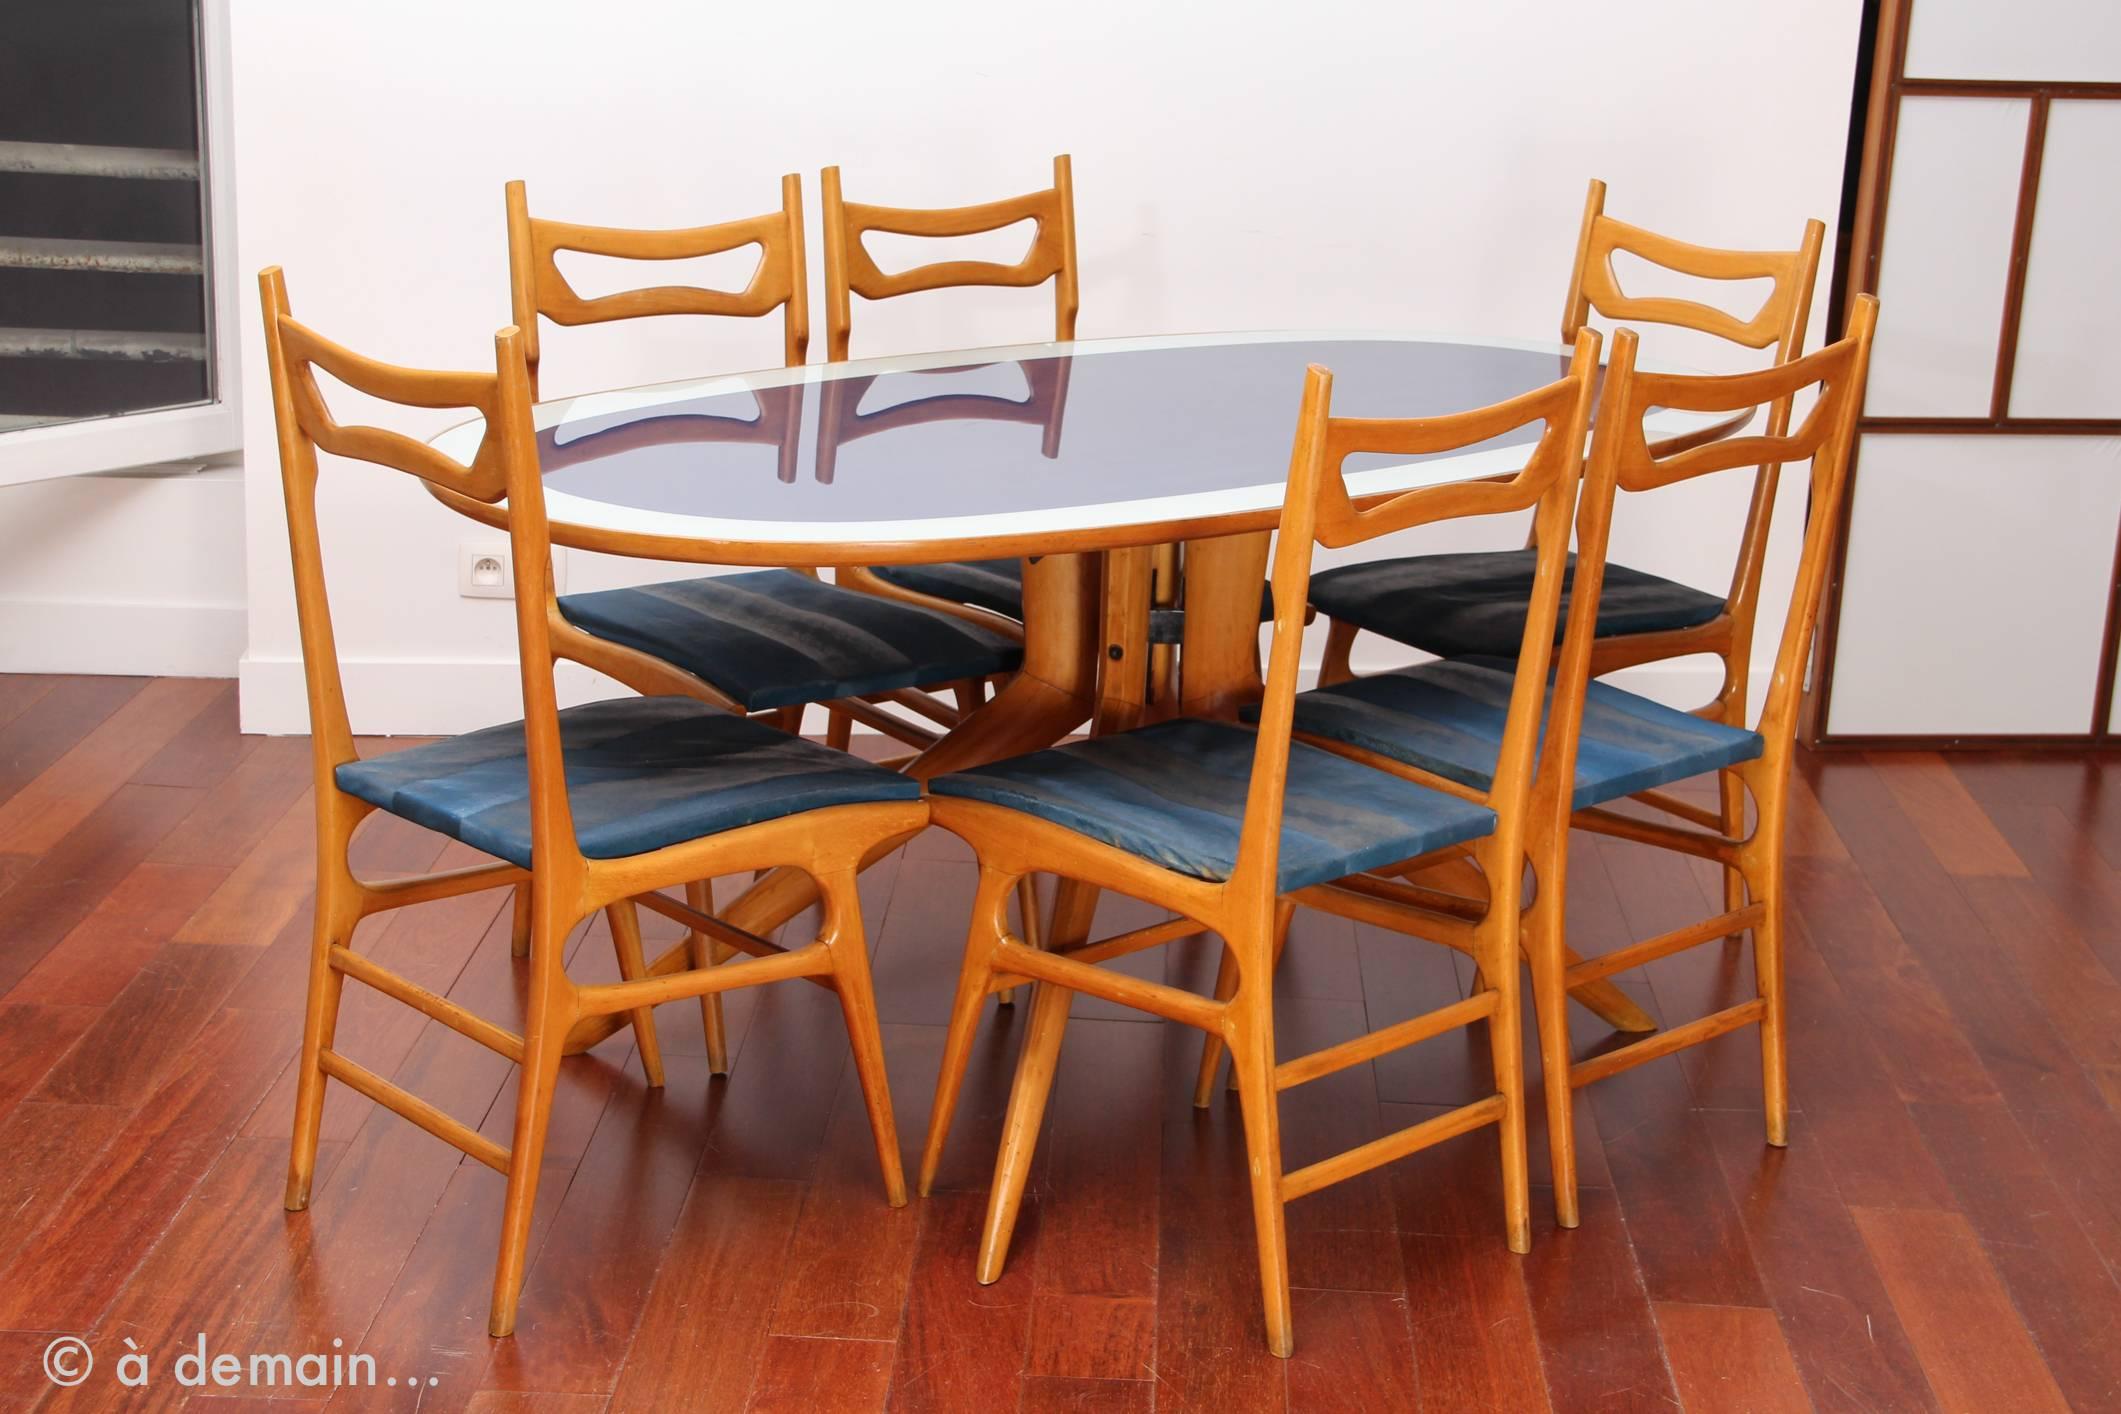 Rare and pretty modernist Italian dining room set in the style of Ico Parisi from the late 1950s or 1960s.
Oval dining table with a beautiful white and blue tray of glass, pretty detail of the wooden edge and a gorgeous wood base made of compass